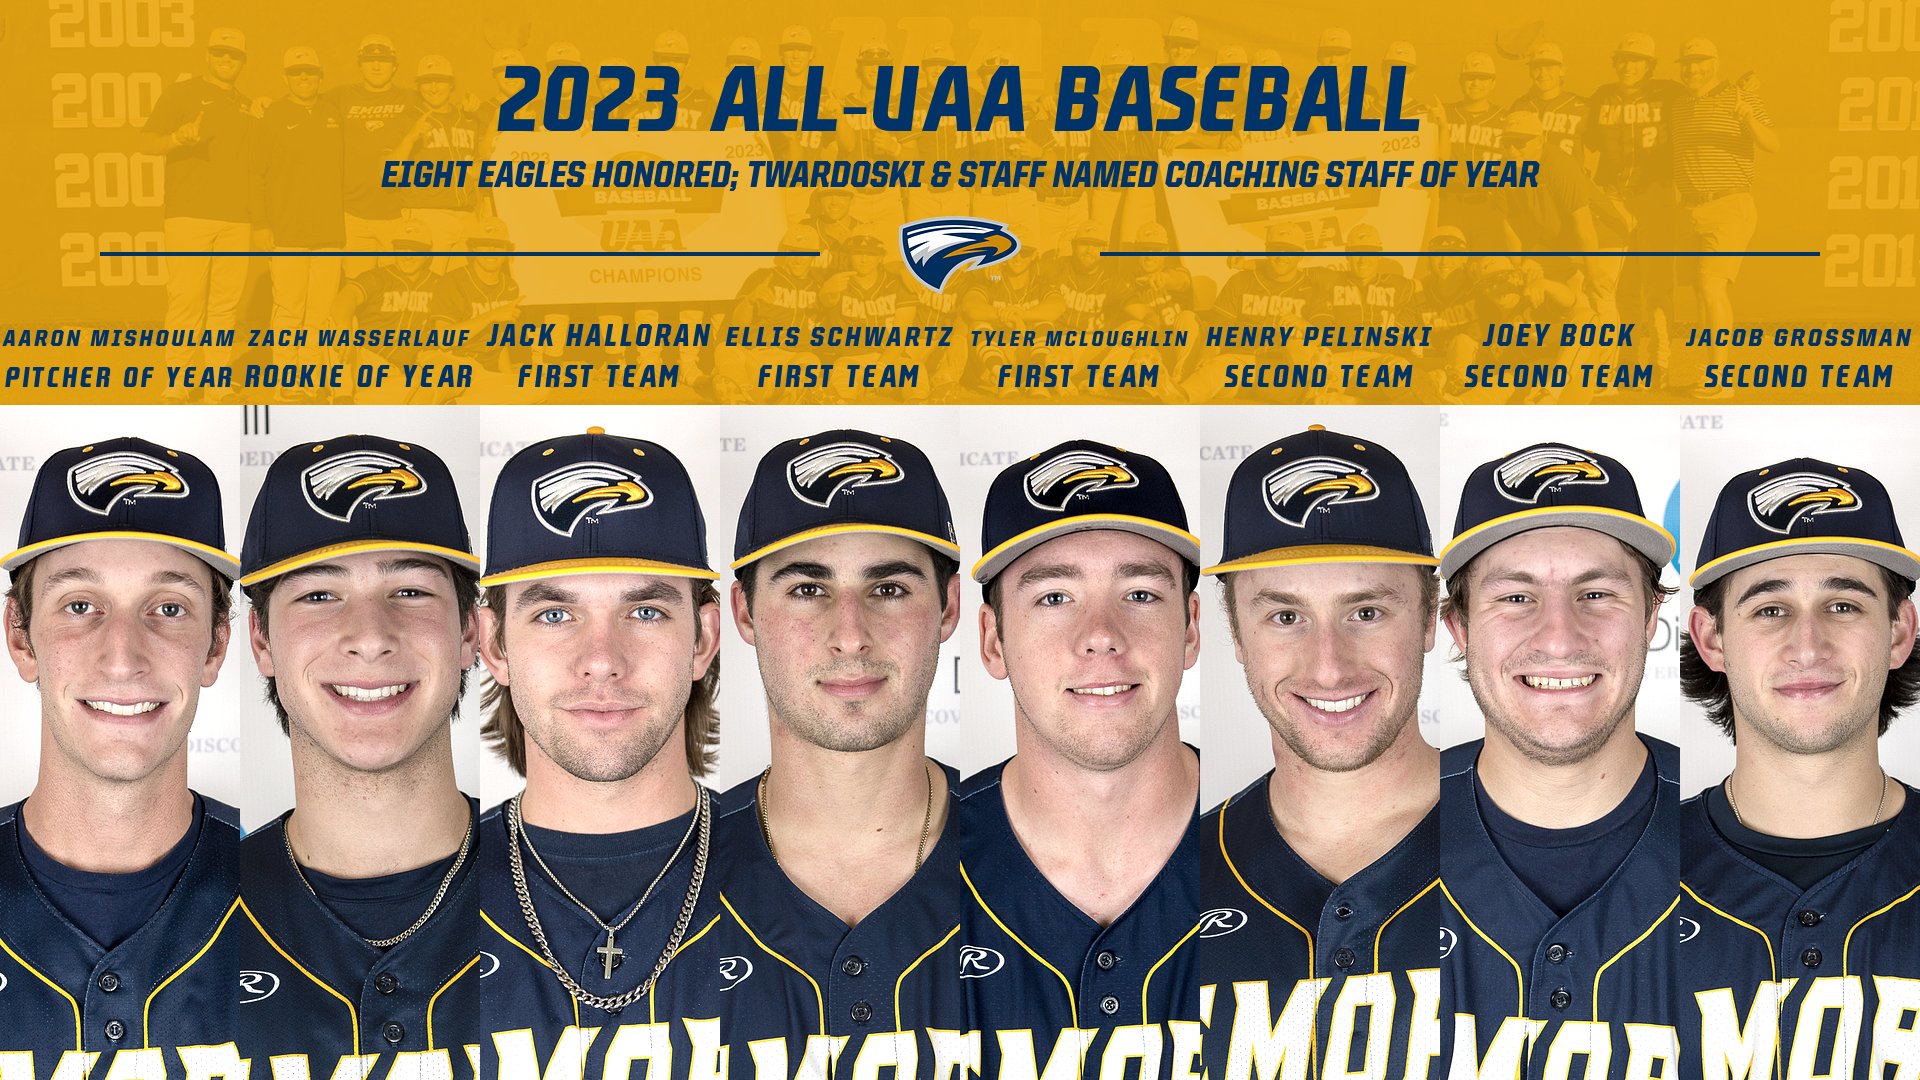 Eight From Emory Baseball Honored on All-UAA Team